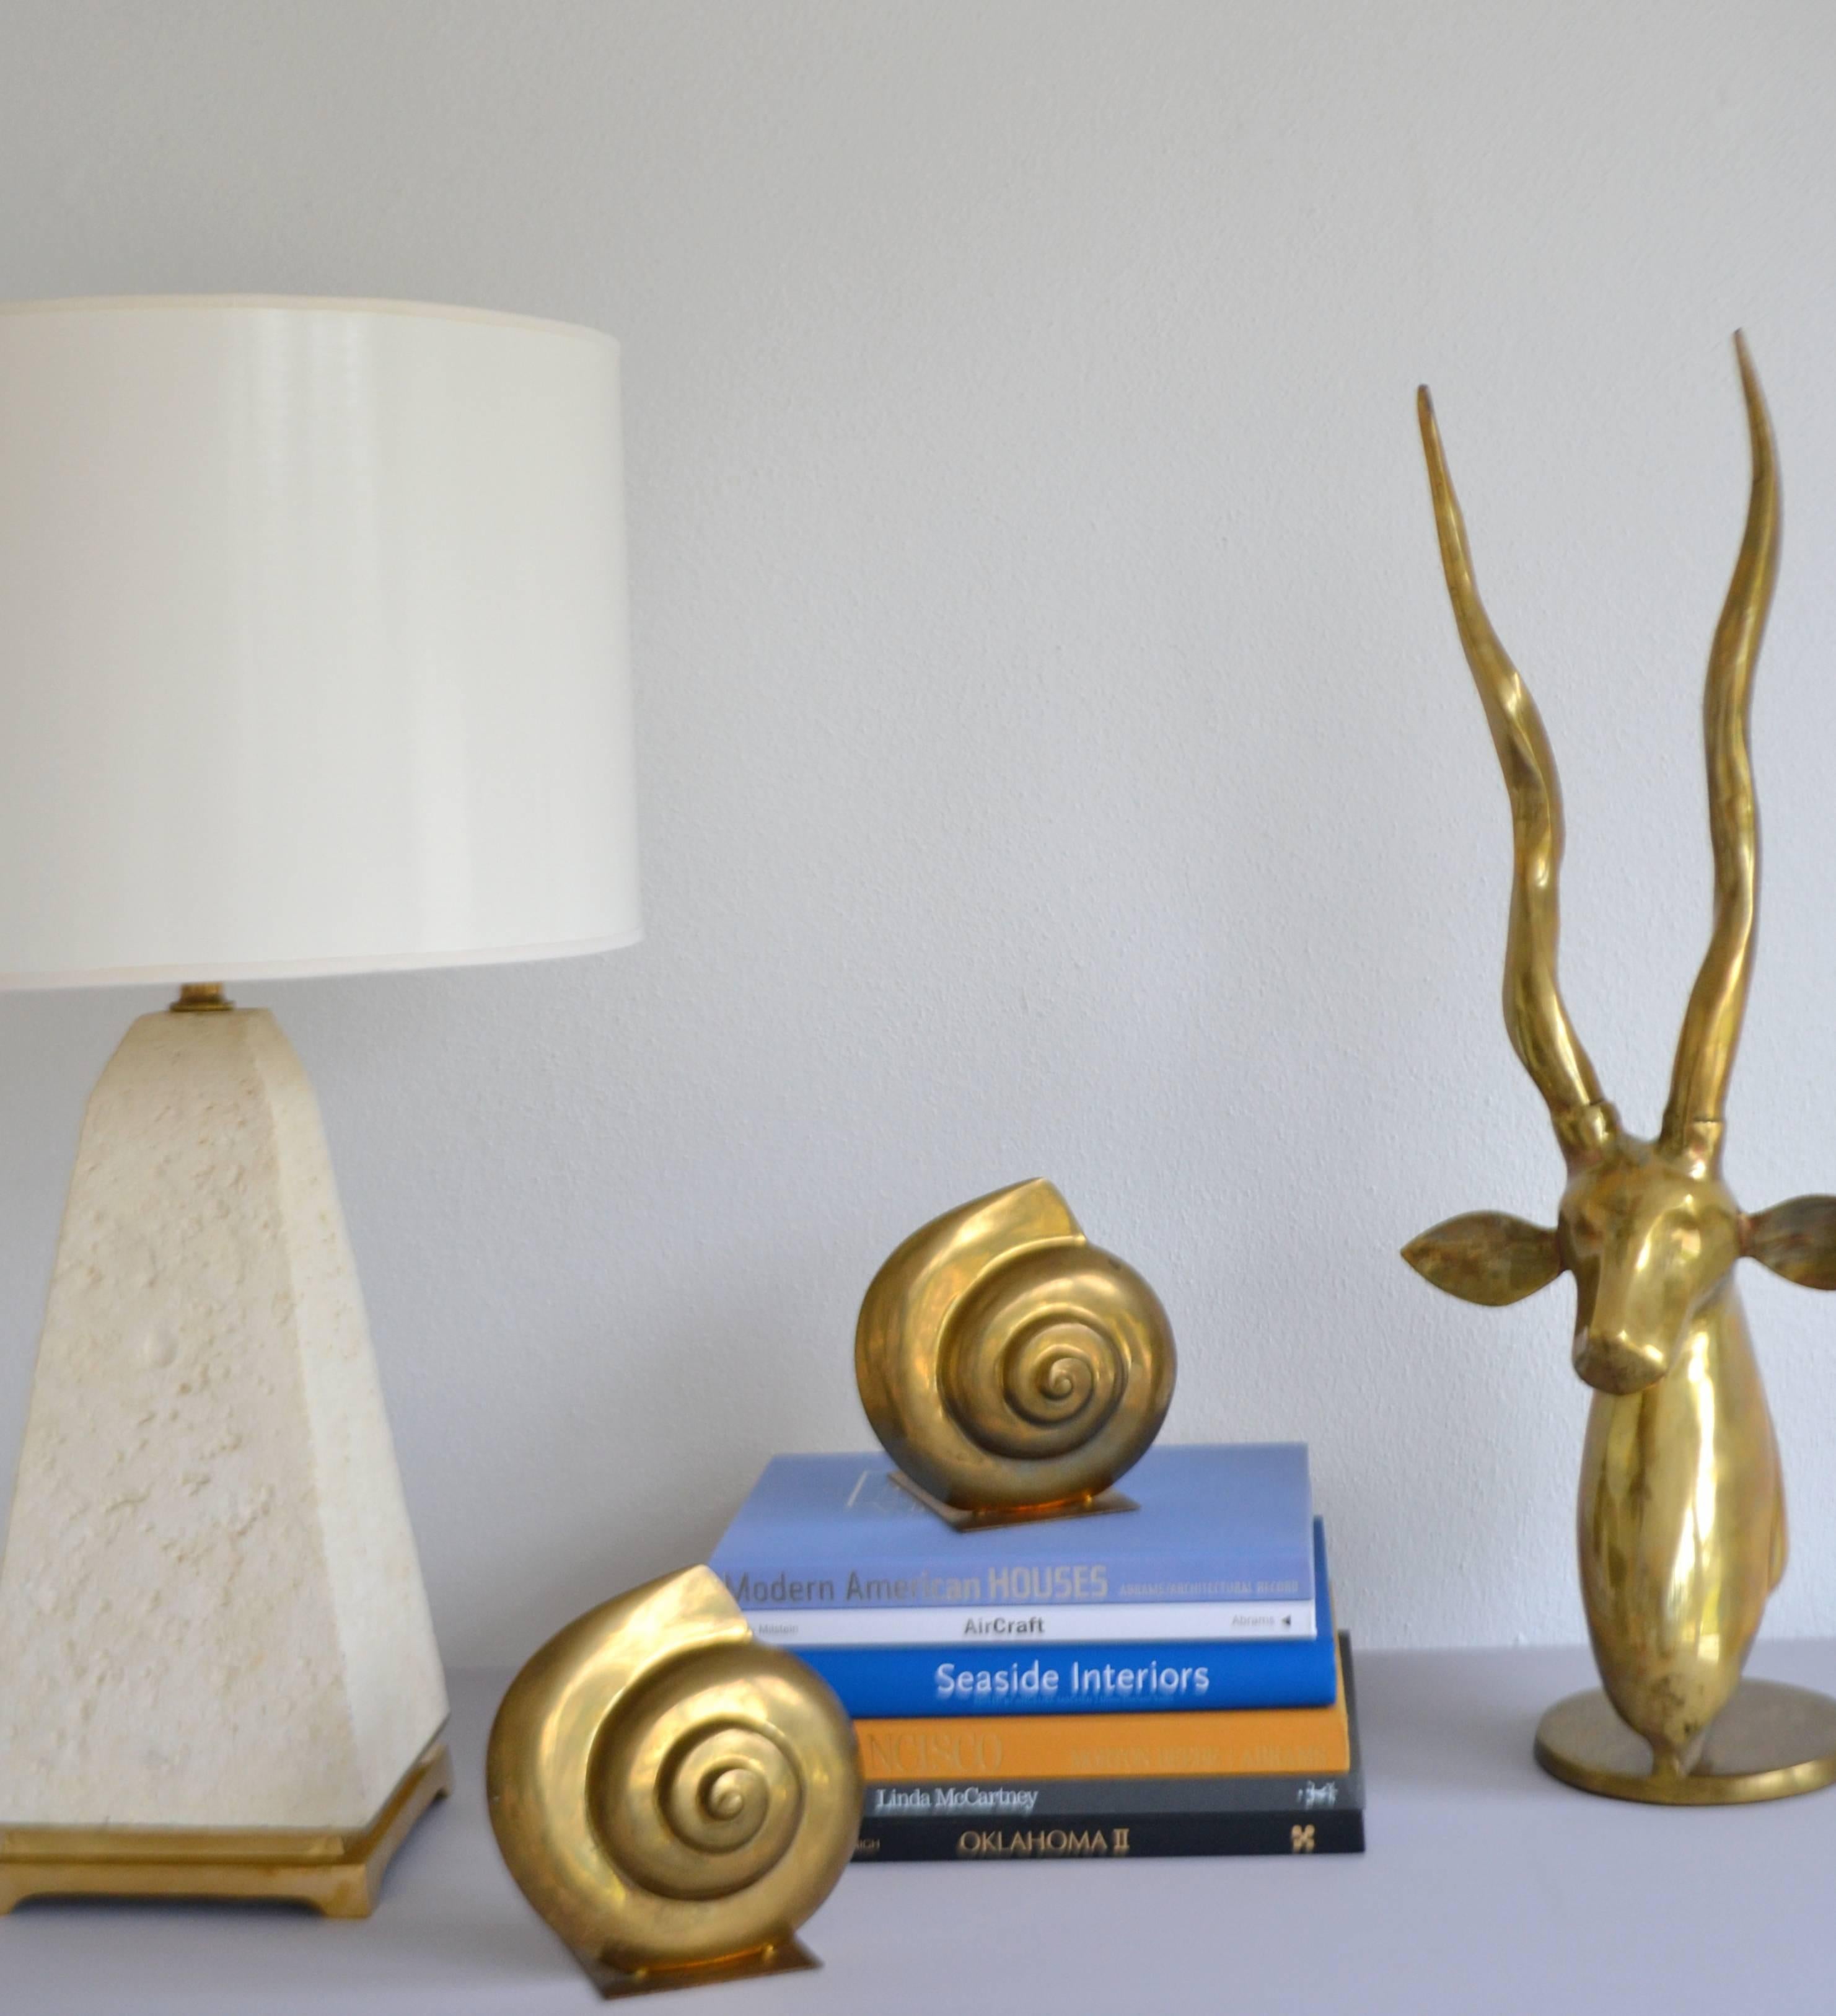 Glamorous pair of Hollywood Regency brass nautilus form bookends, circa 1950s -1960s. This stunning decorative garniture is in excellent original condition with a wonderful oxidized patina.